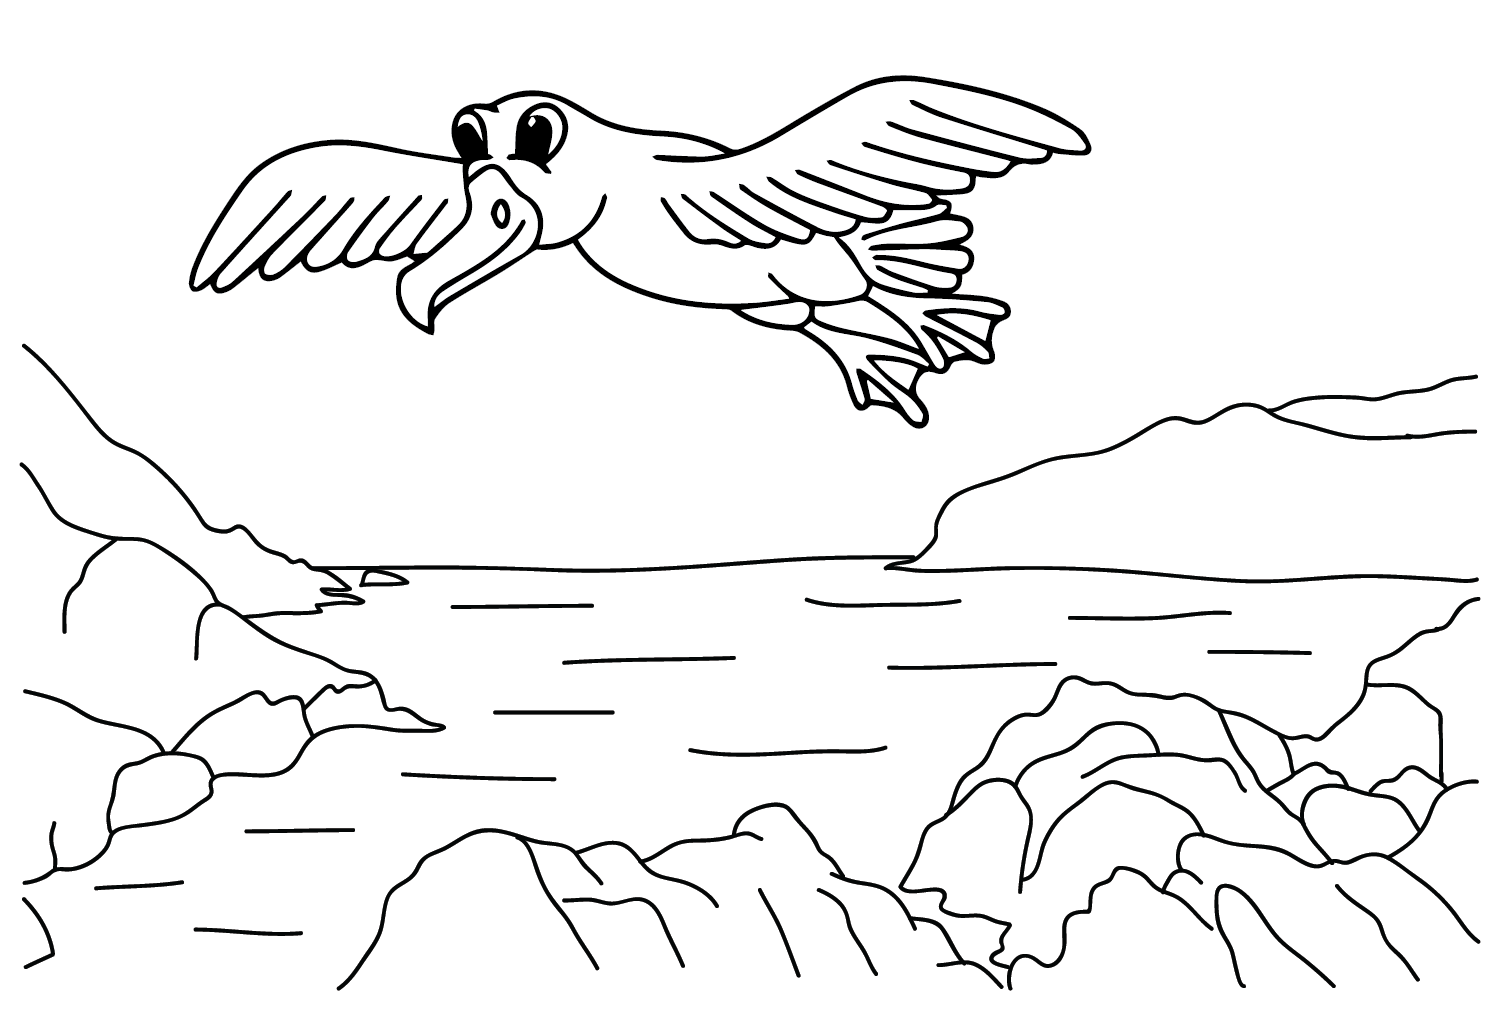 Albatross Coloring Page for Adults from Albatross